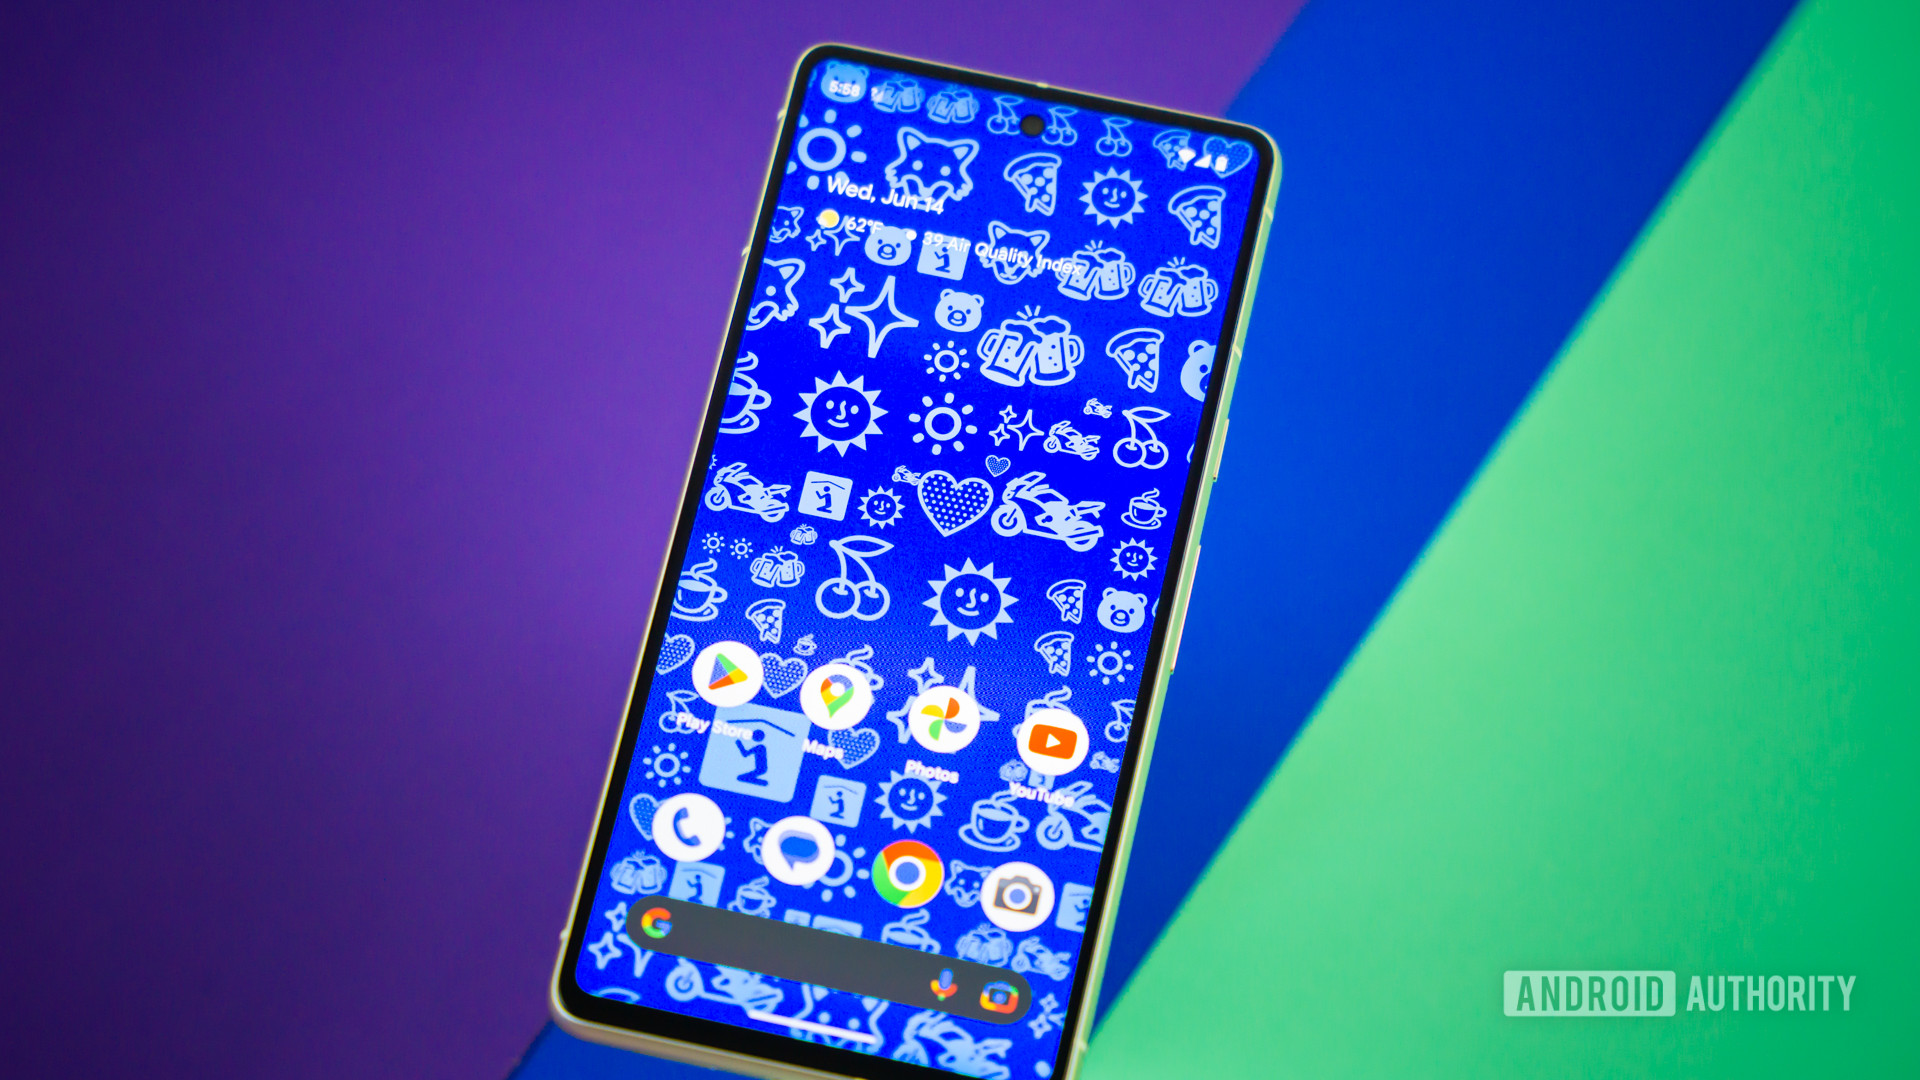 Android Emoji wallpapers on Android phone stock photo 1